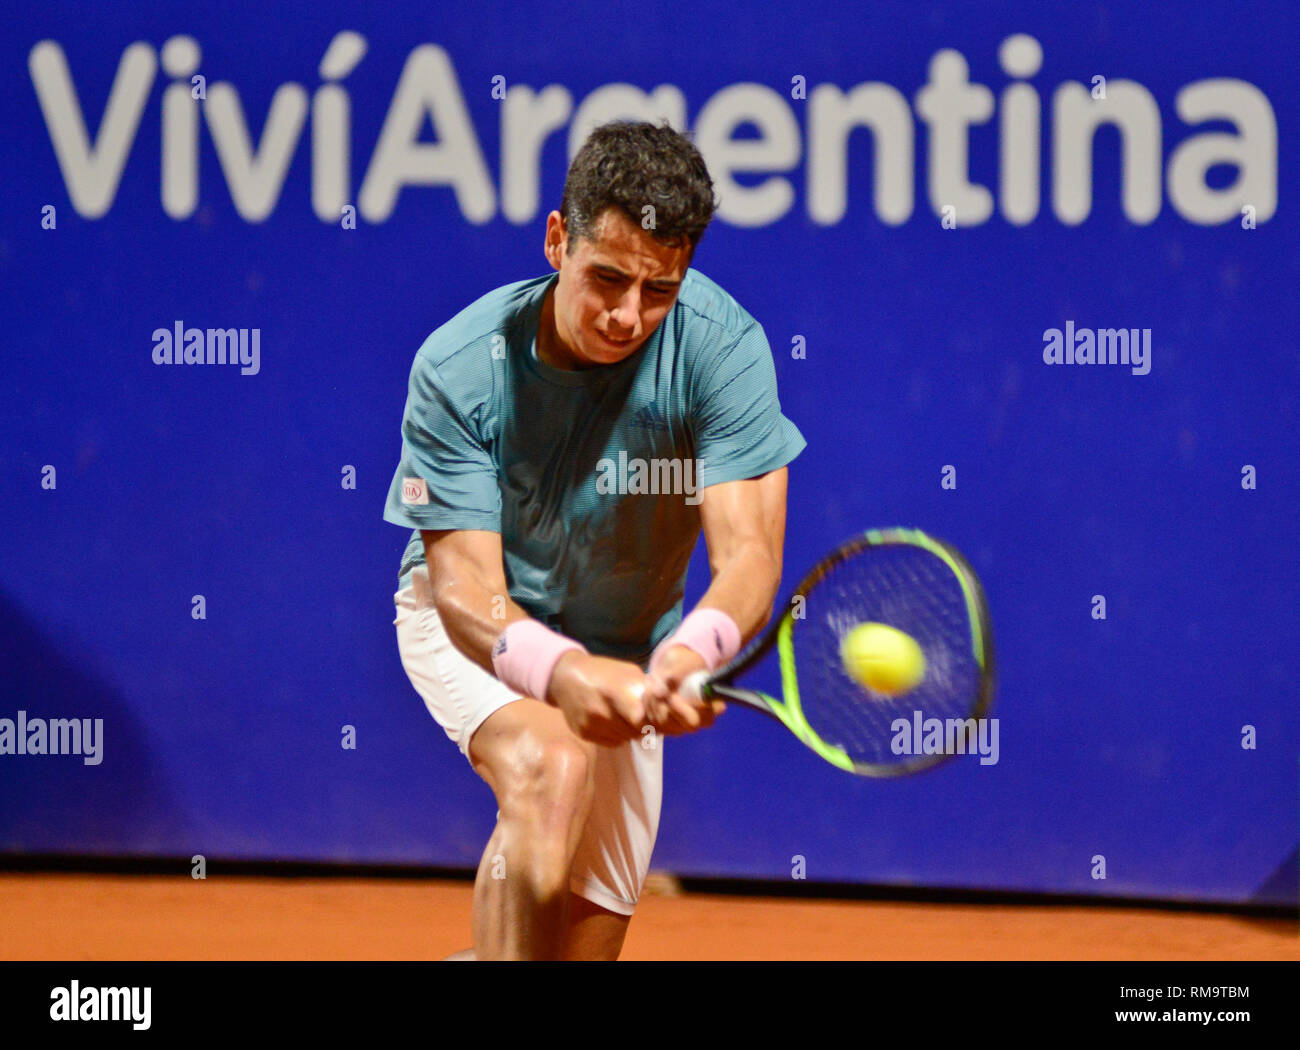 Buenos Aires, Argentina. 13th Feb 2019. Jaume Munar (Spain) defeat Fabio Fognini (Italy) in the Argentina Open, an ATP 250 tennis tournament. Credit: Mariano Garcia/Alamy Live News Stock Photo